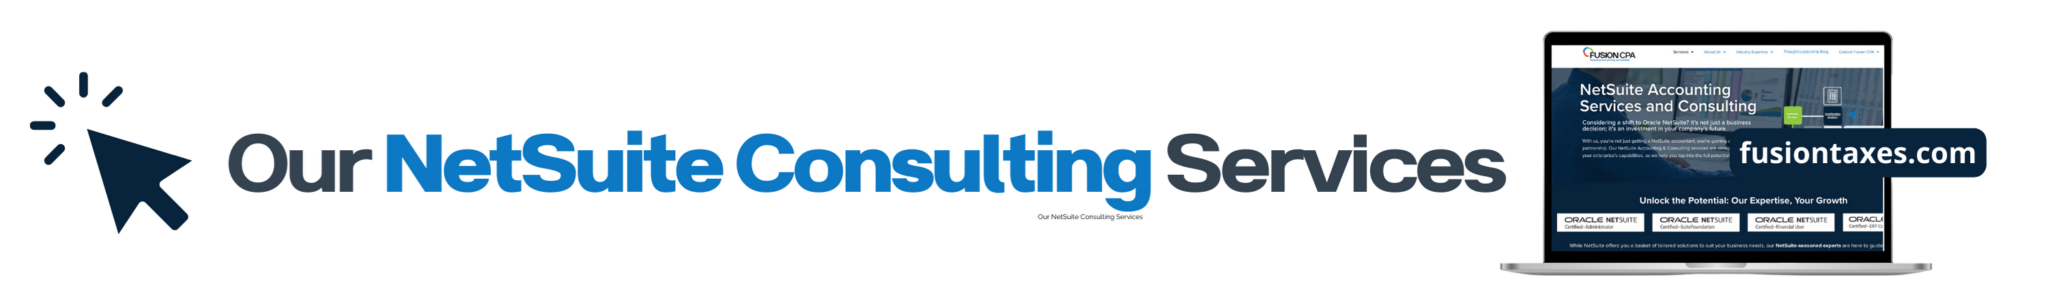 Our NetSuite Consulting Services